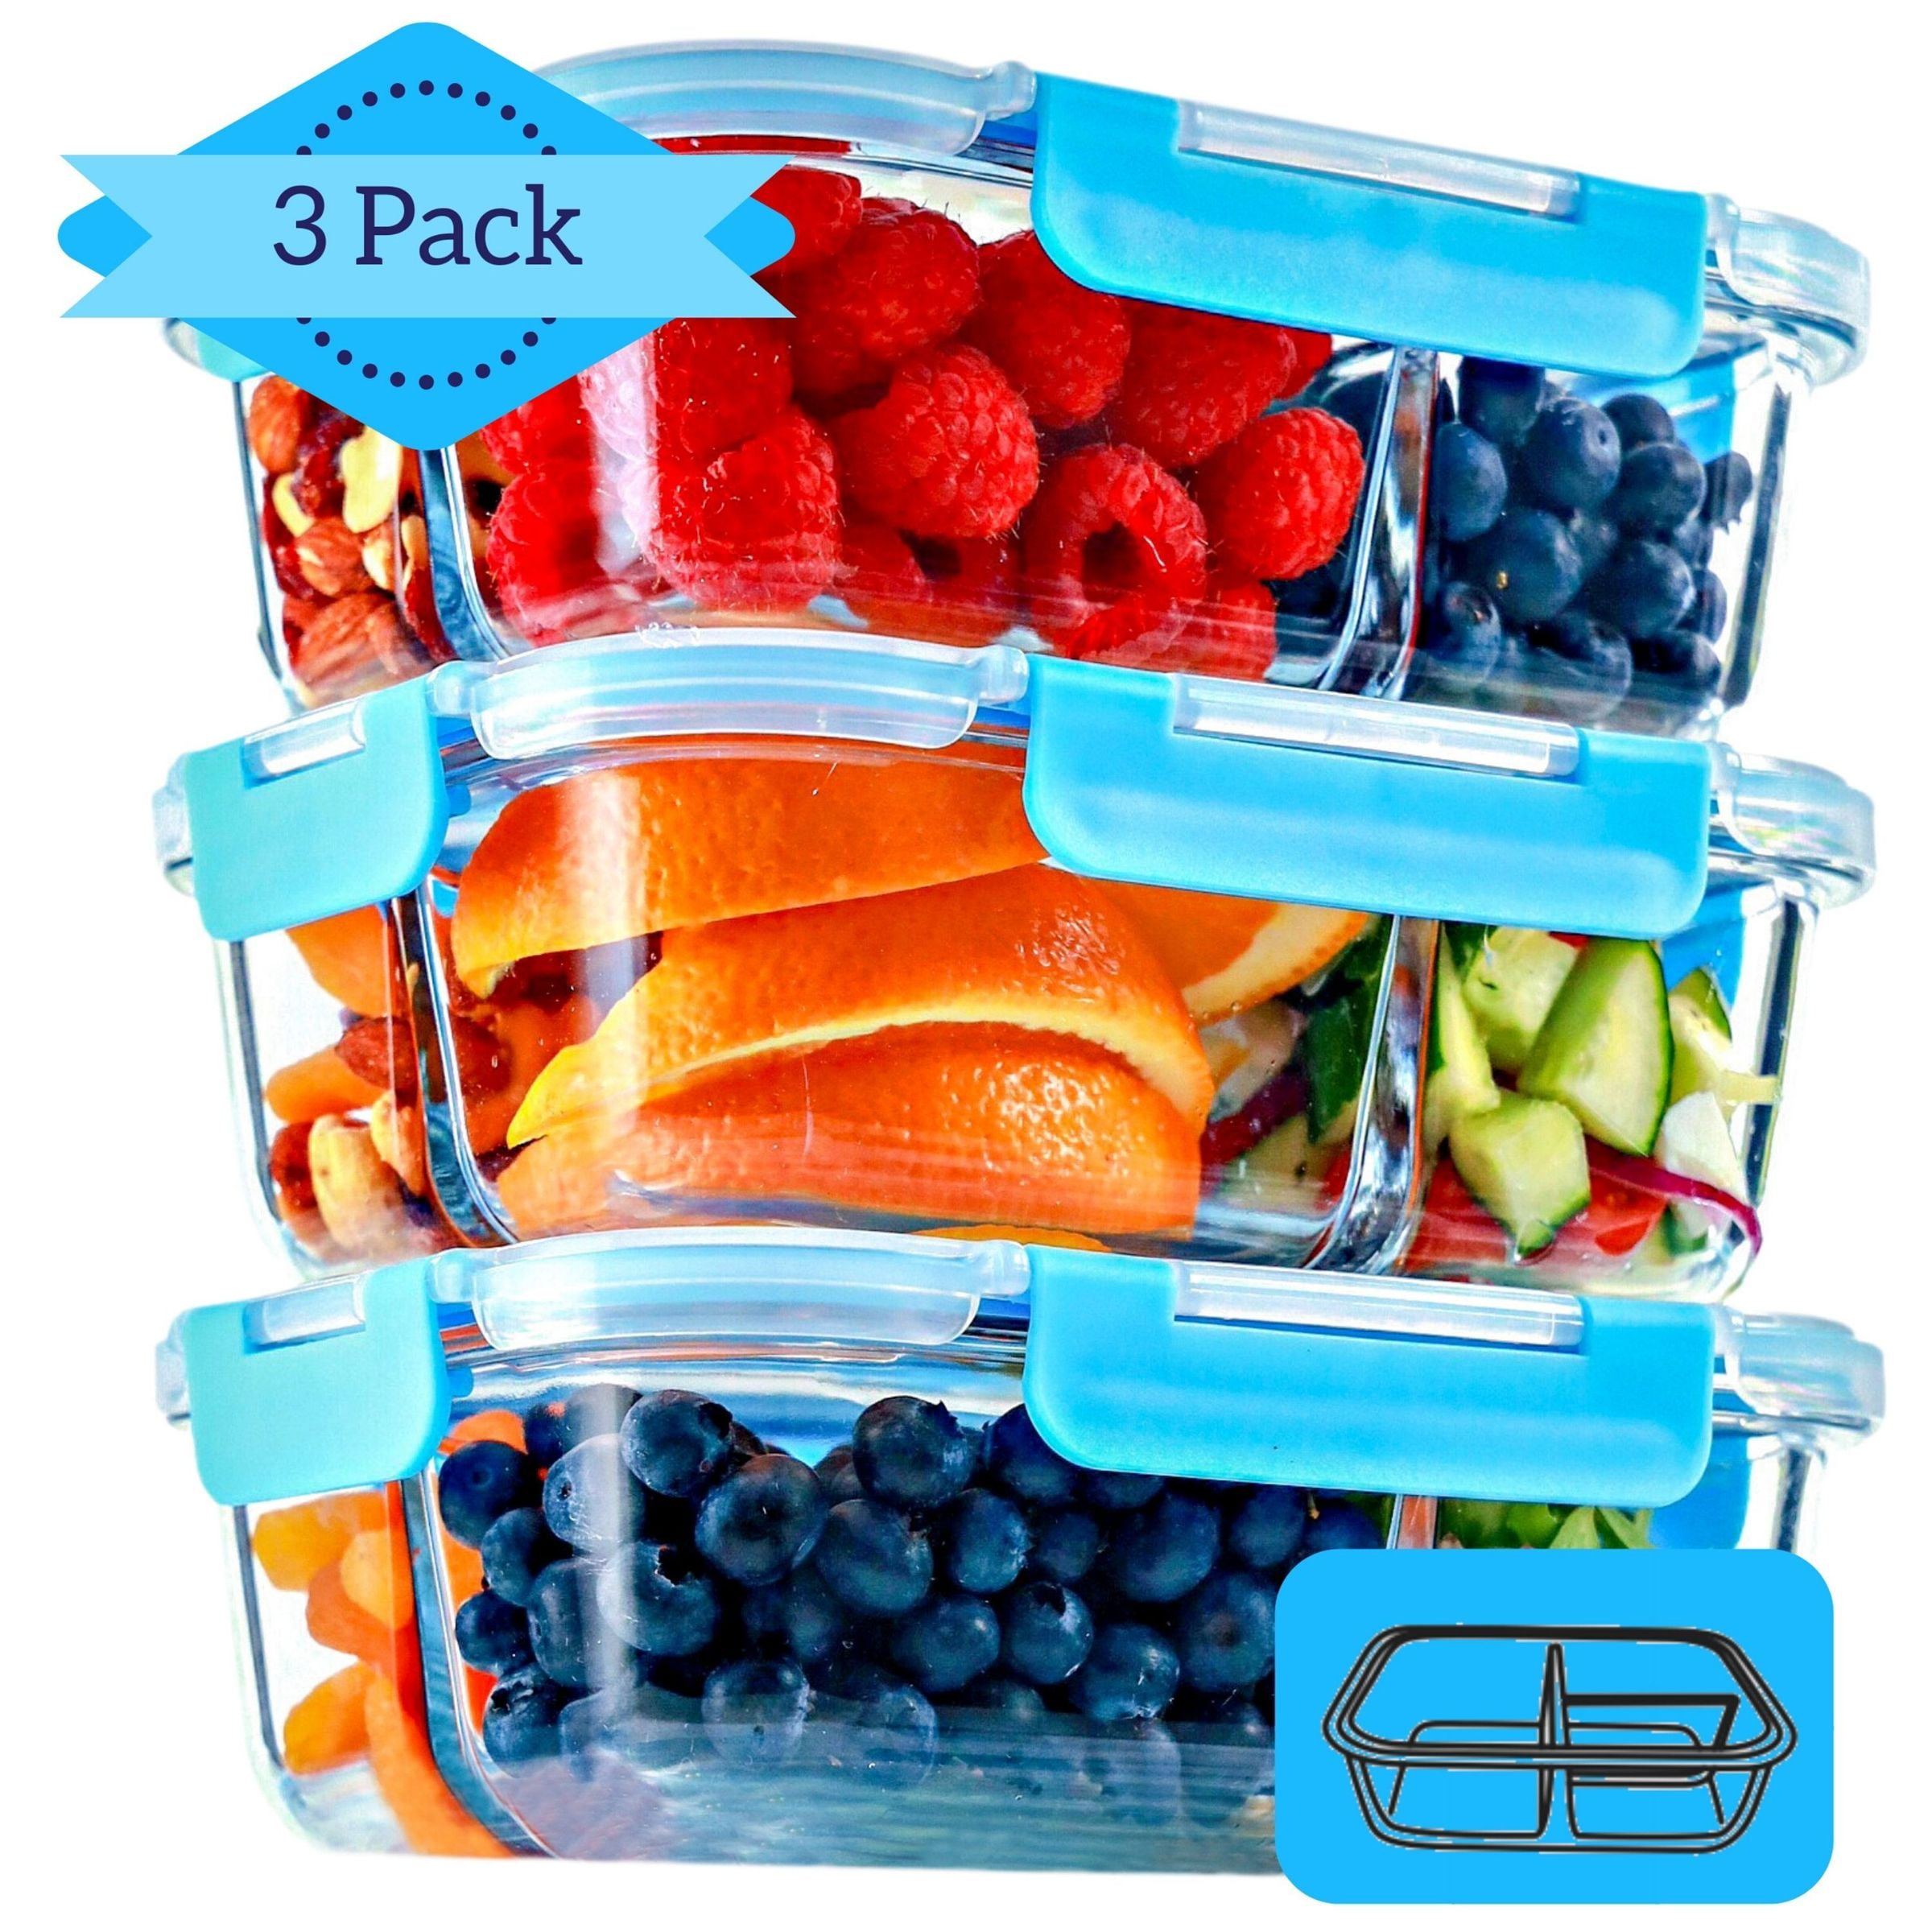 3 Compartment Glass Meal Prep Containers (3 Pack, 35 Oz) - Food Storage  Containers with Lids, Portion Control, BPA Free, Microwave, Oven and Dishwasher  Safe, Airtight, Leakproof 